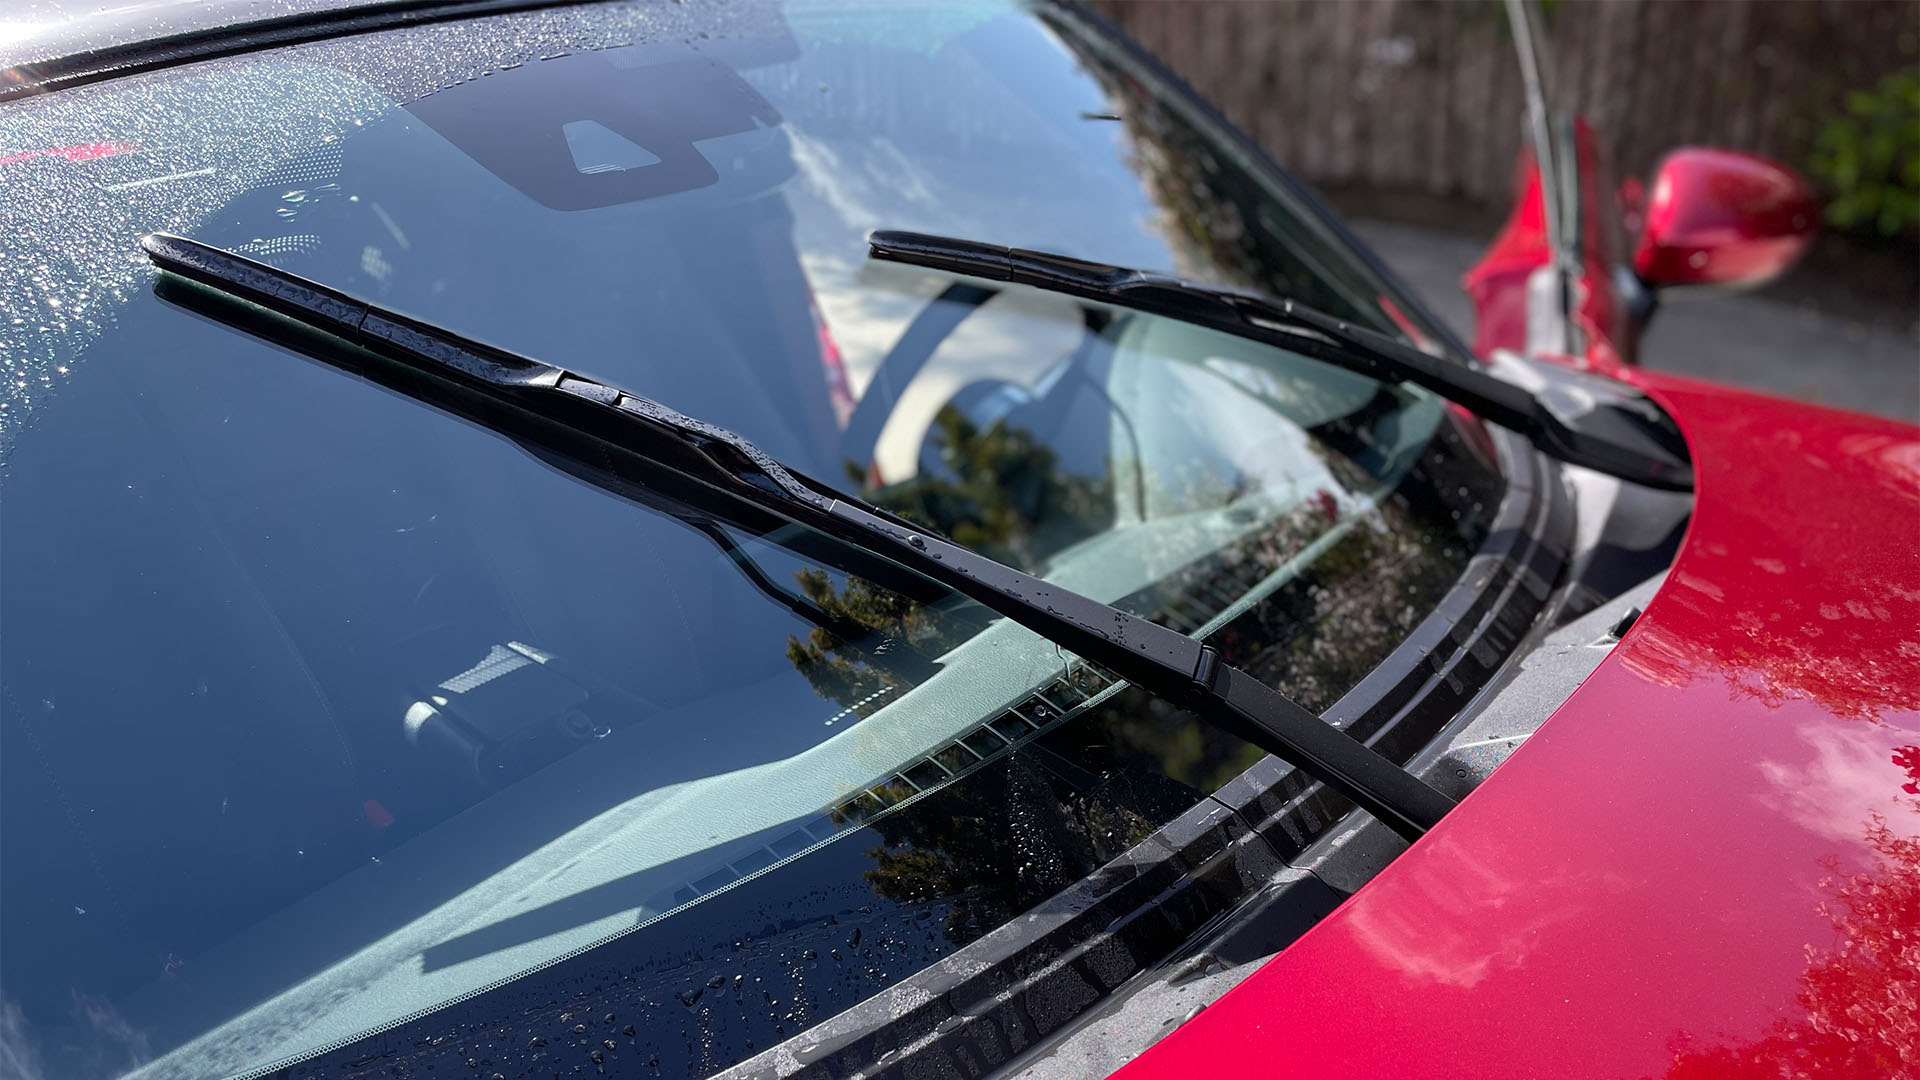 Is there a product that I can apply to my car's windshield that will  completely repel rain, so I don't have to use my wiper blades when it's  raining? - Quora